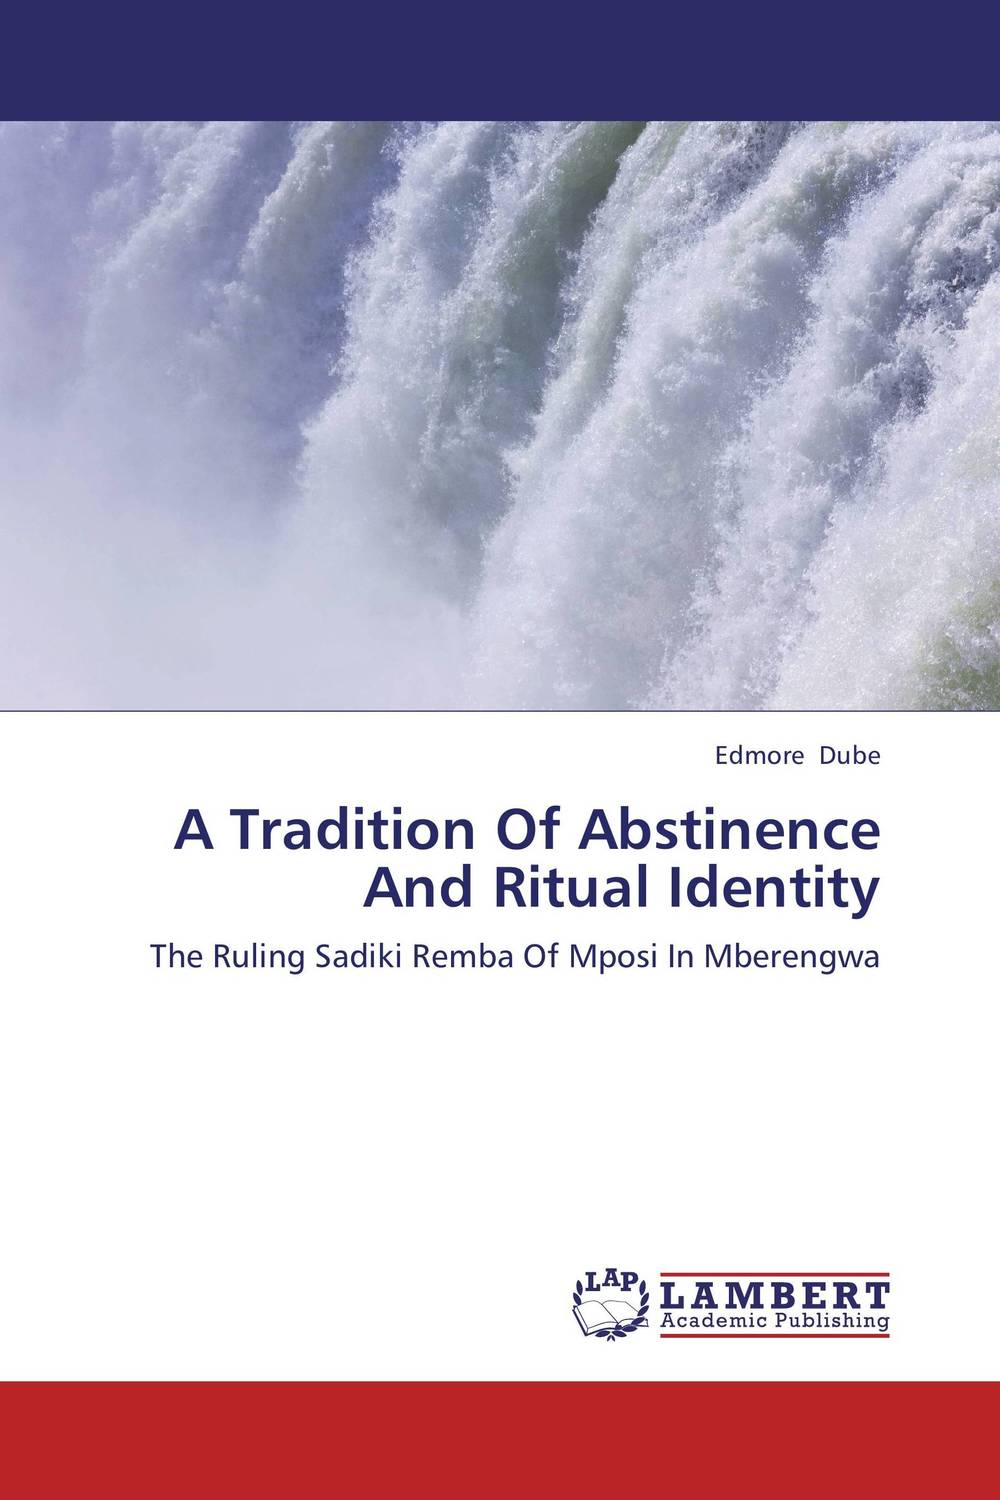 A Tradition Of Abstinence And Ritual Identity